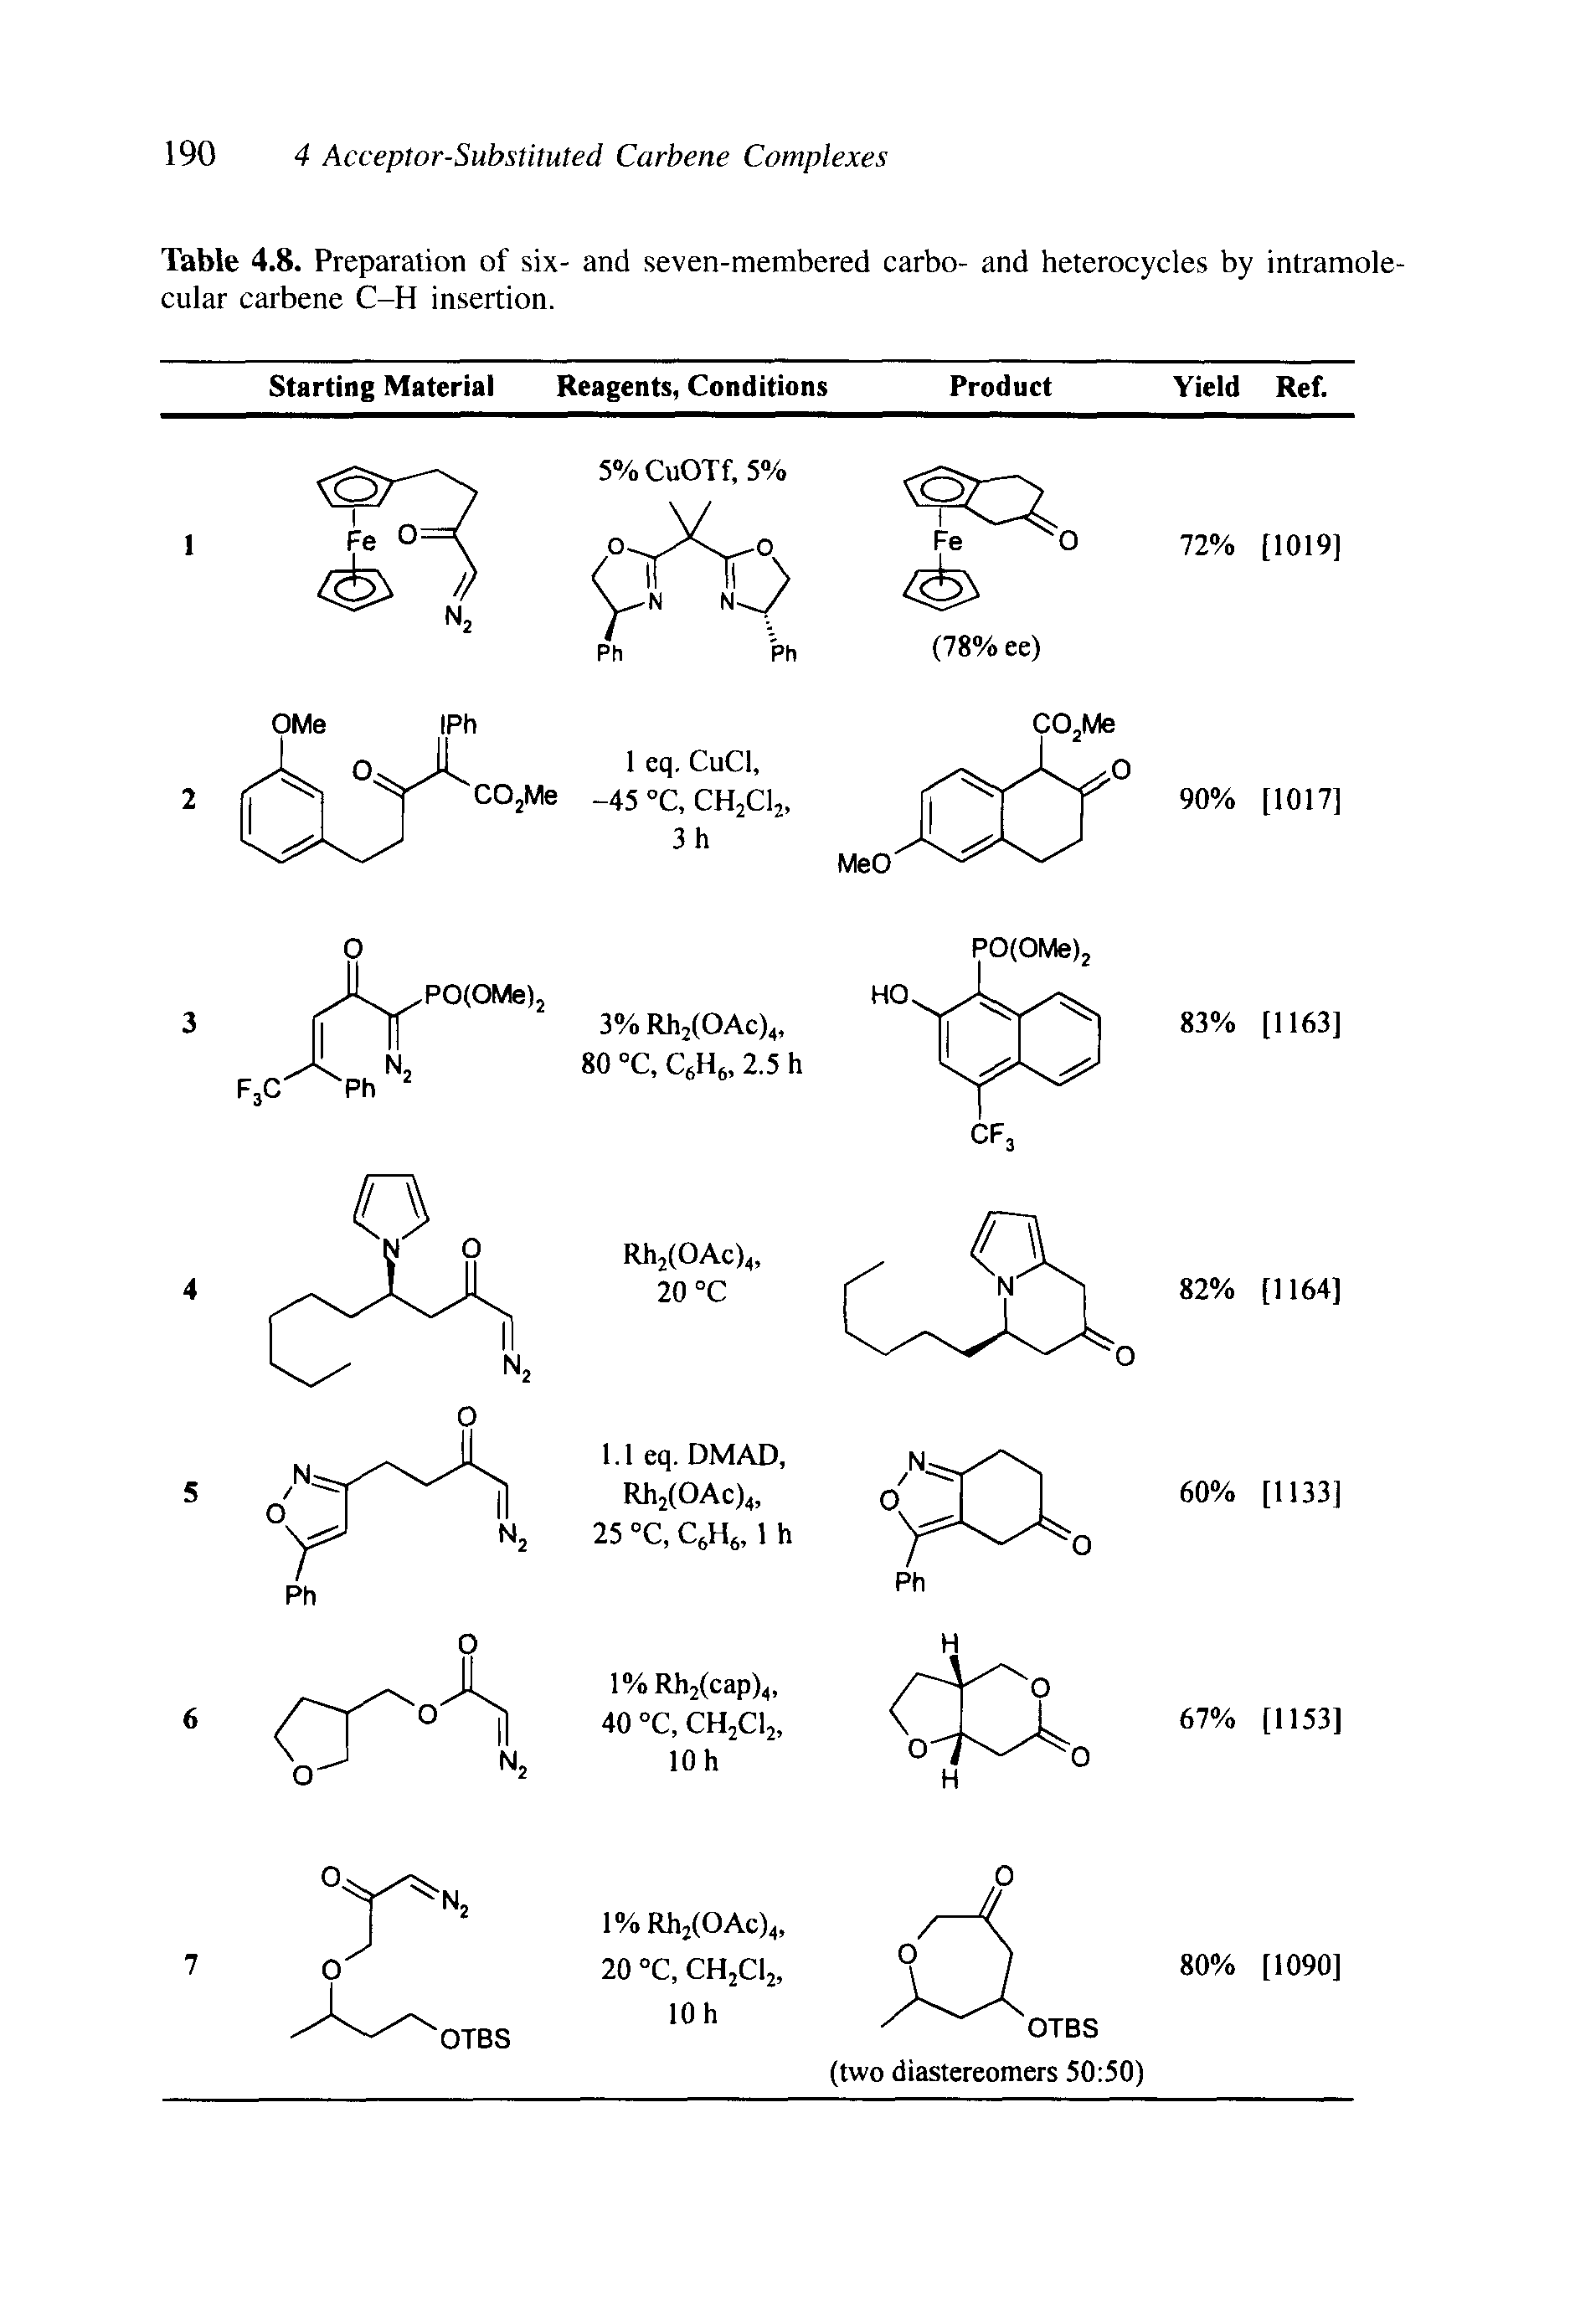 Table 4.8. Preparation of six- and seven-membered carbo- and heterocycles by intramolecular carbene C-H insertion.